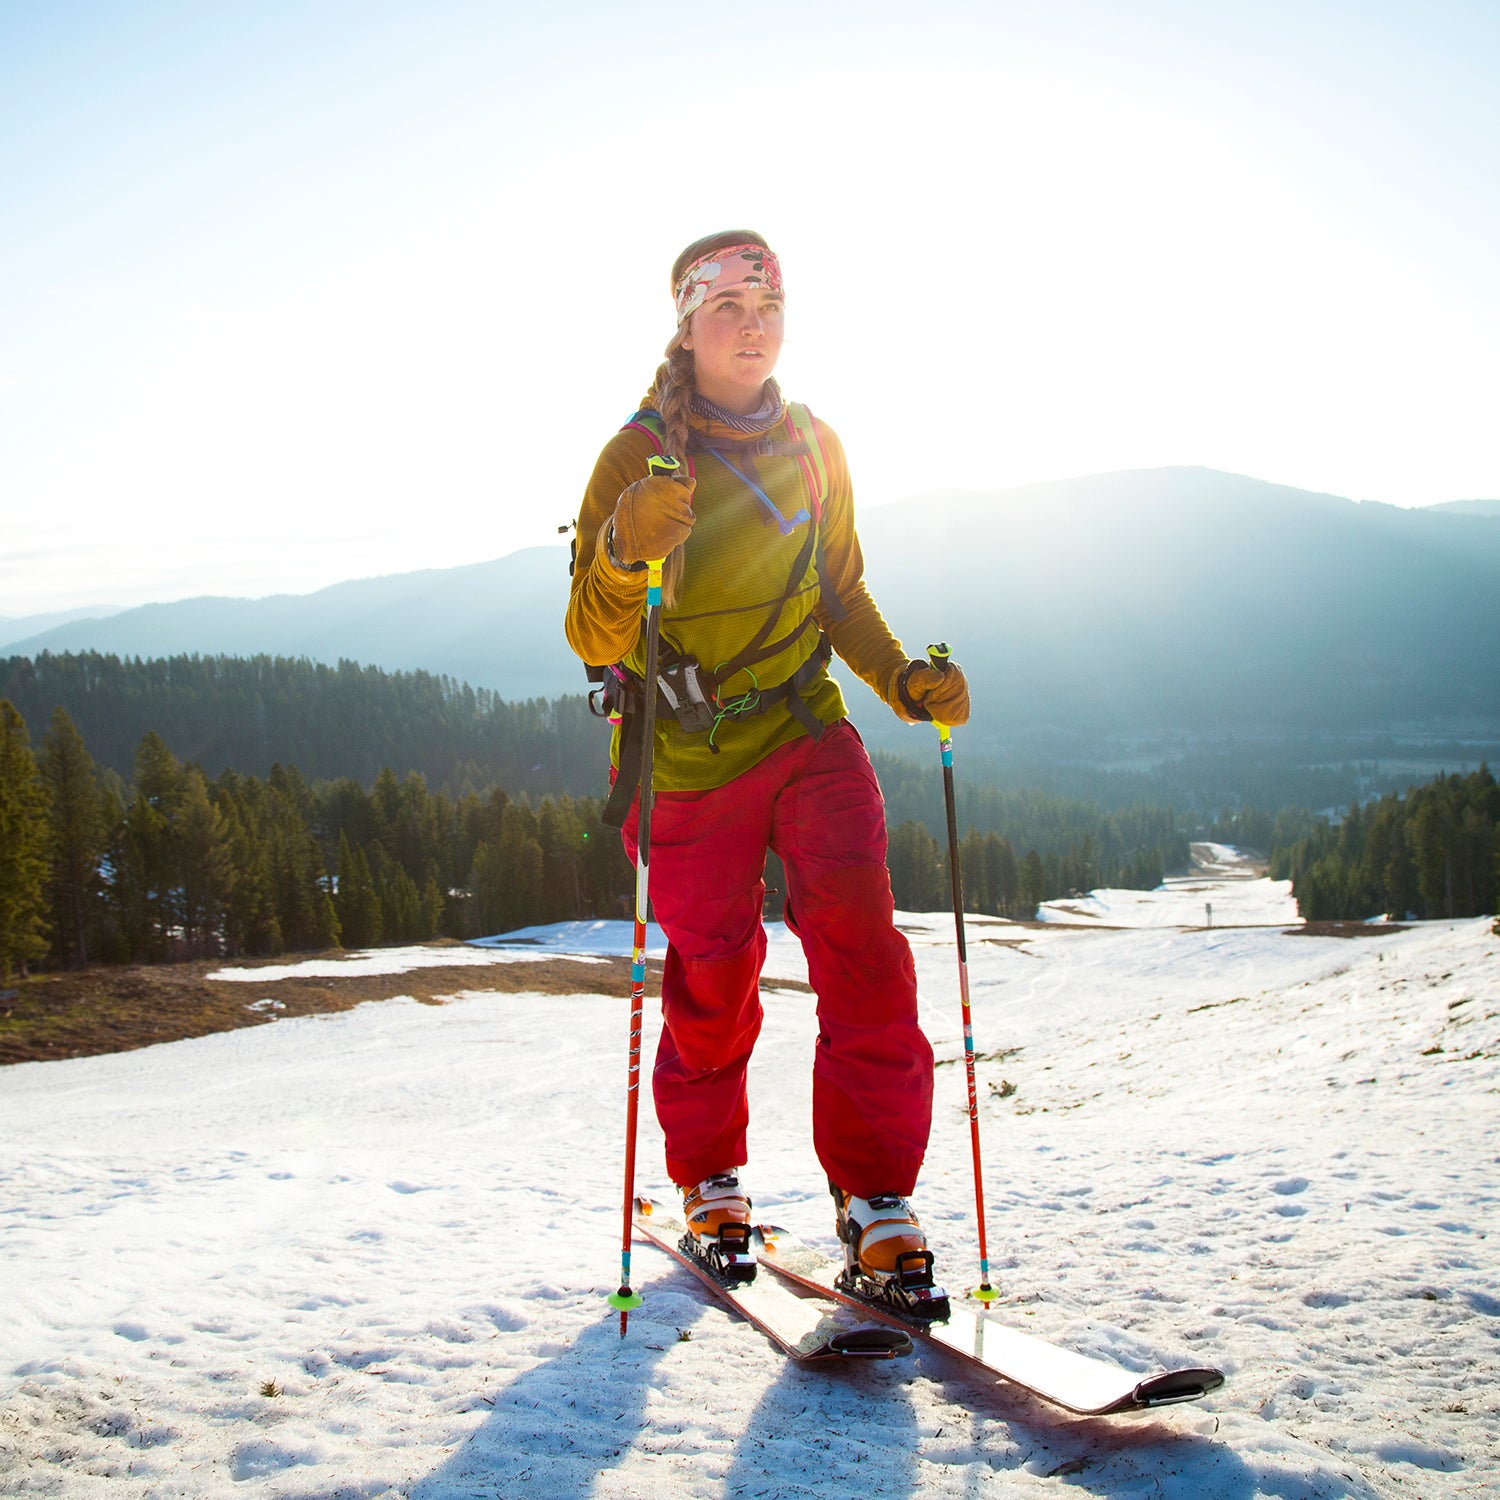 The women's ski clothing trends of 2023-2024